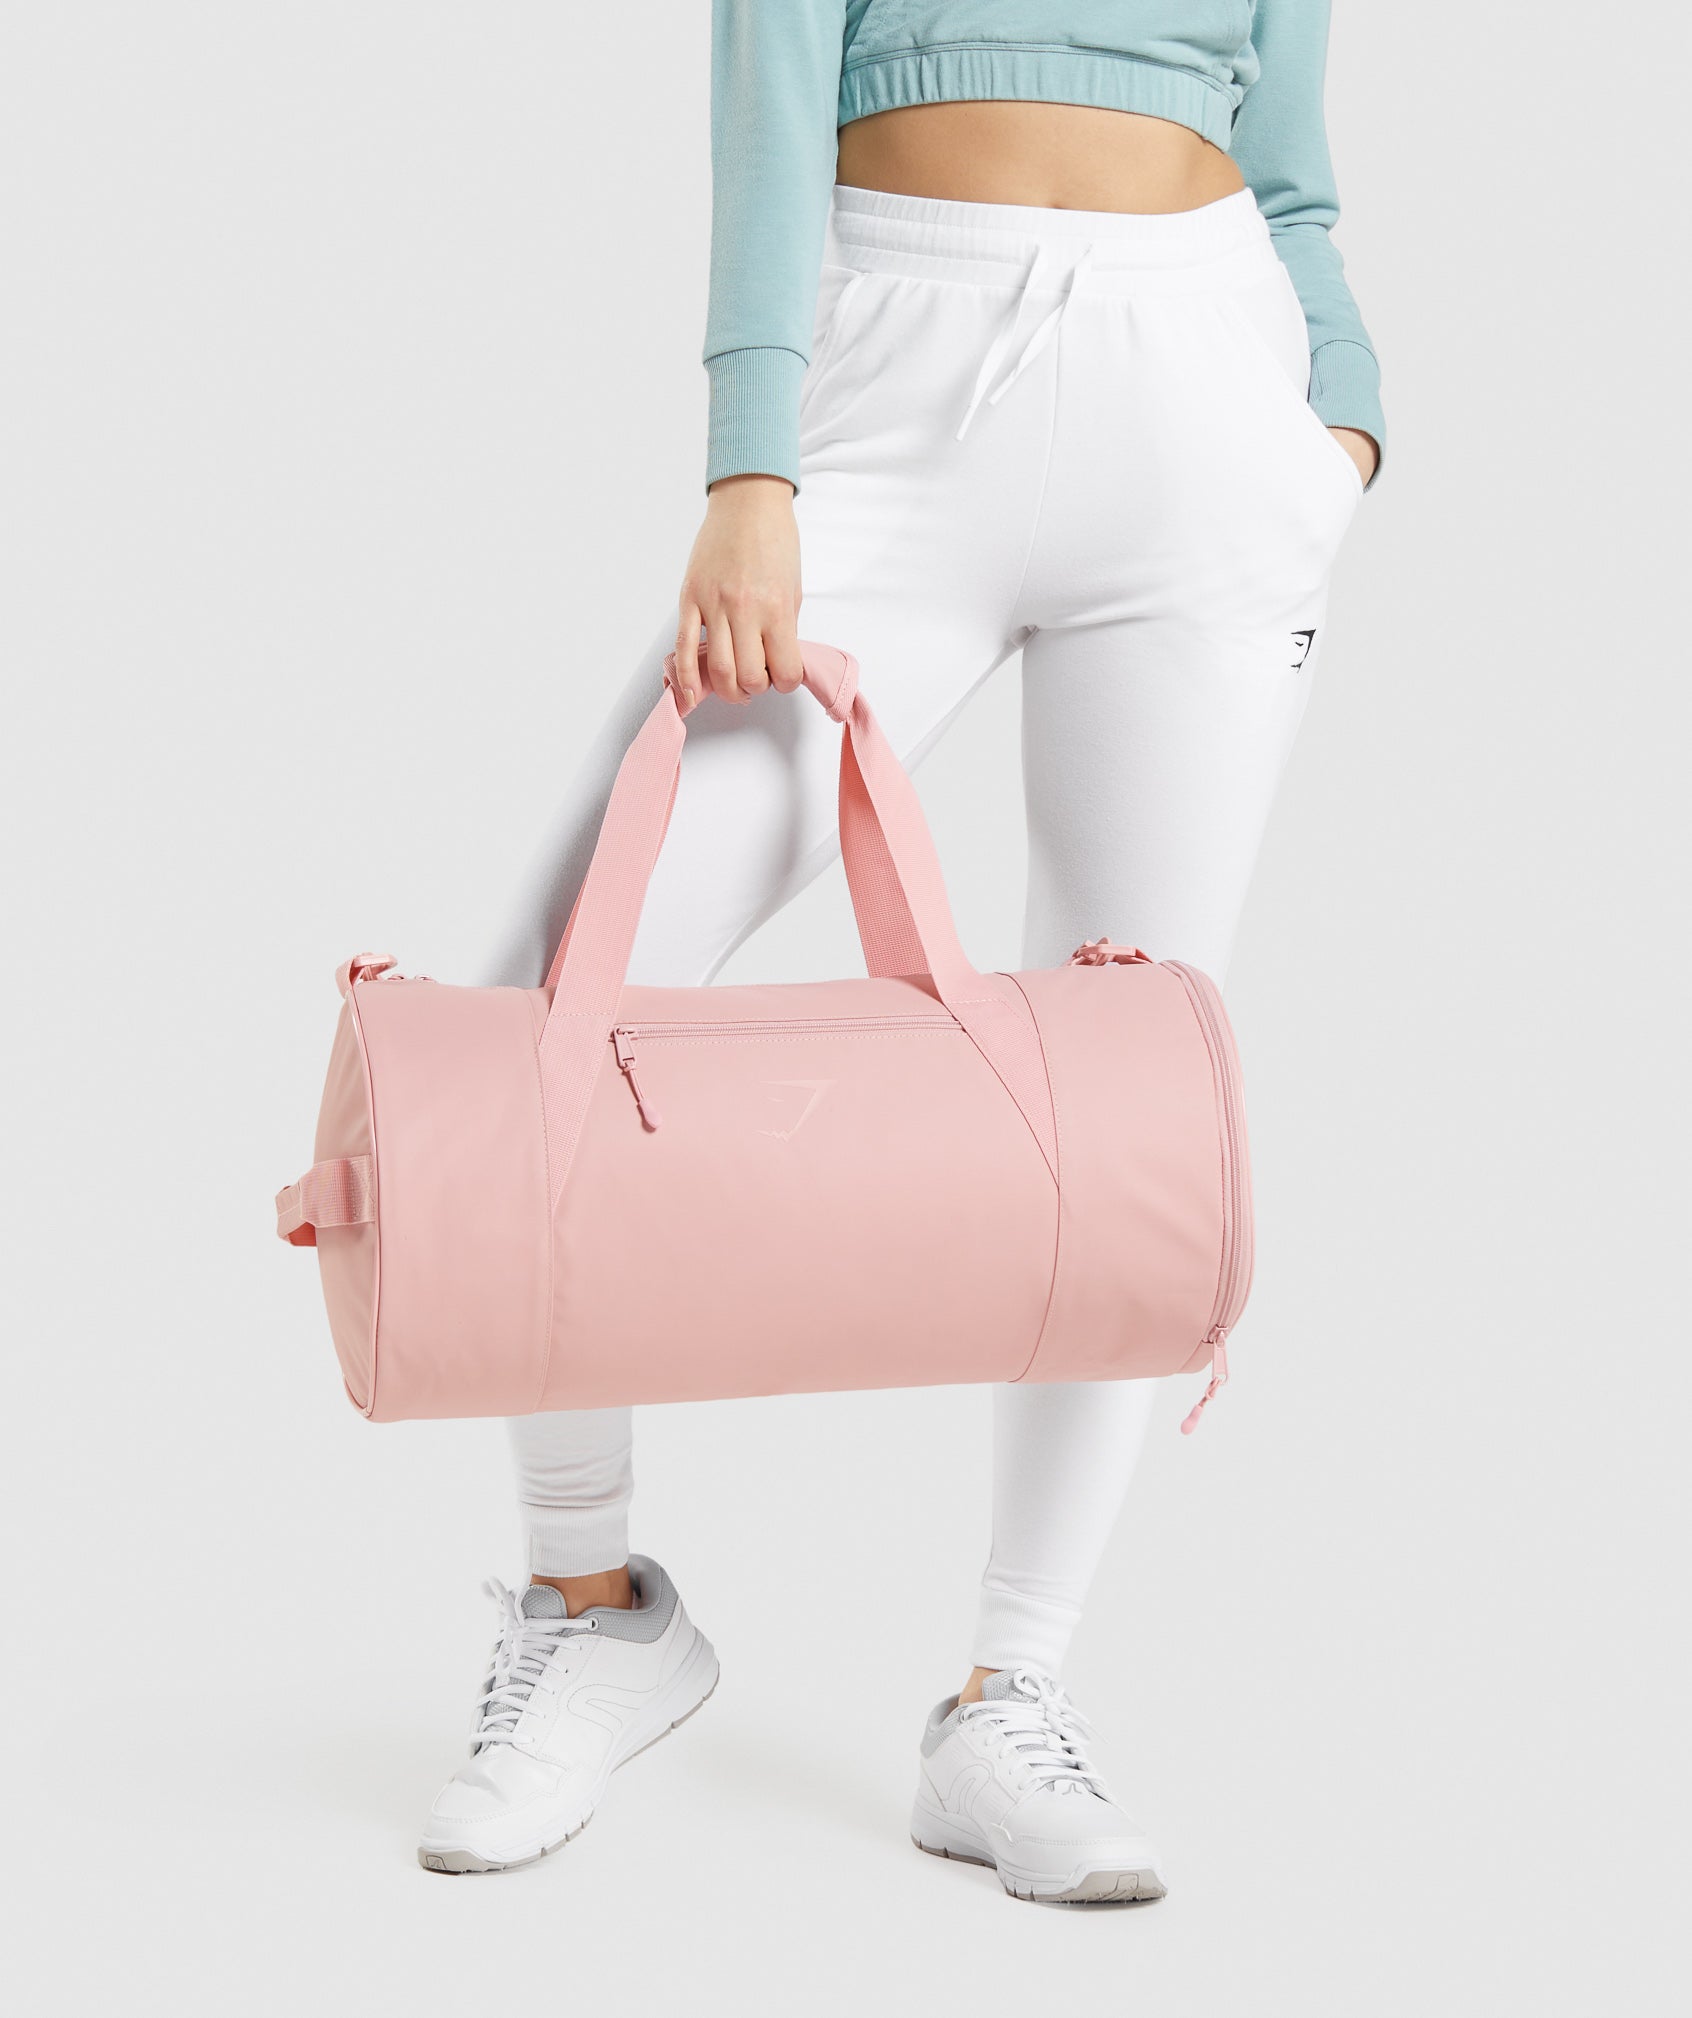 Barrel Bag in Paige Pink - view 2